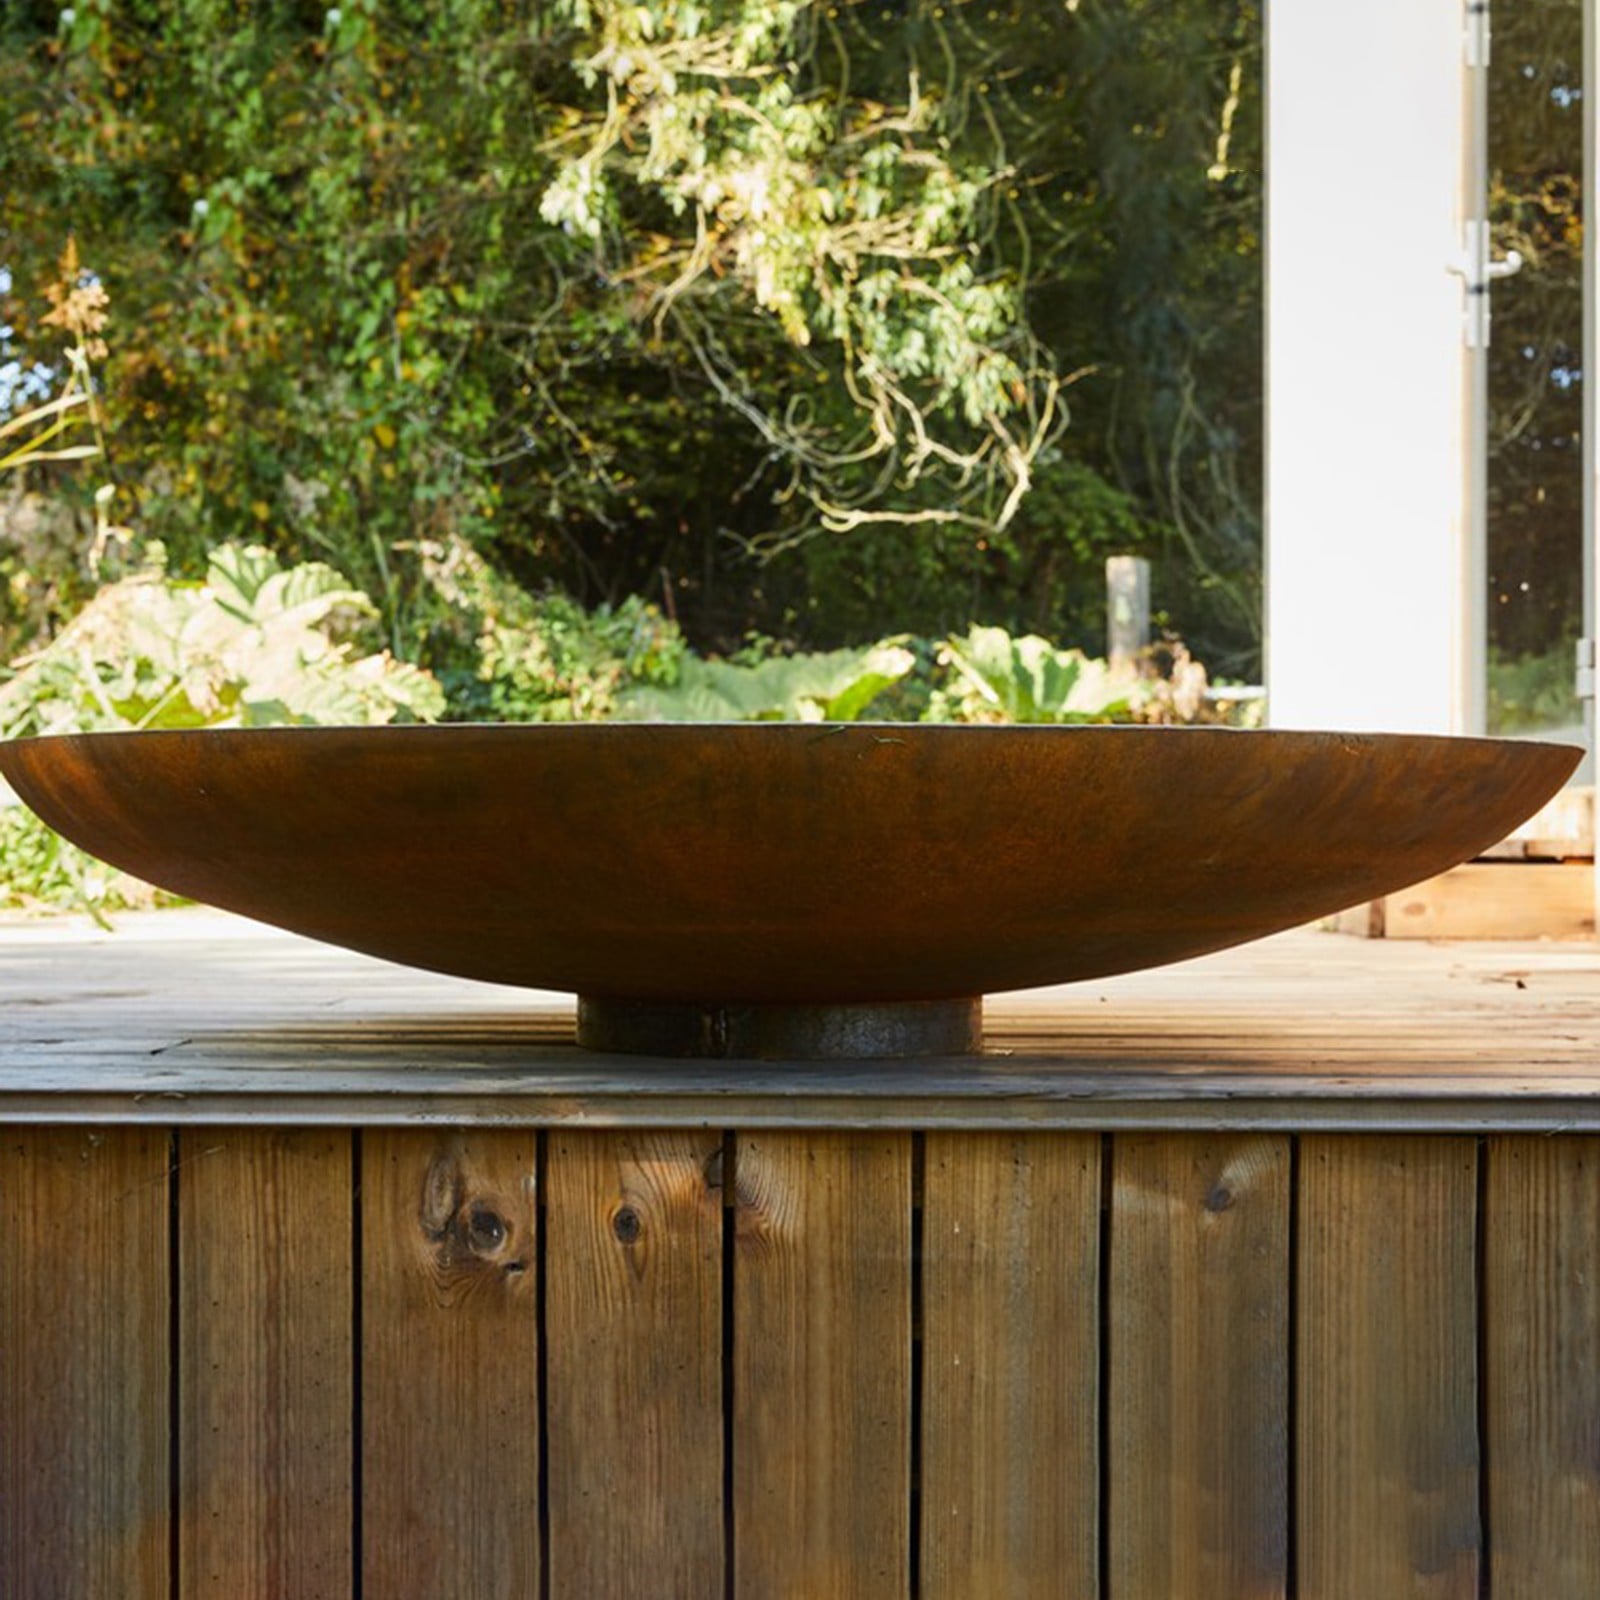 https://www.harrodhorticultural.com/uploads/images/products/CorTen-Curved-Fire-Bowl-3.jpg